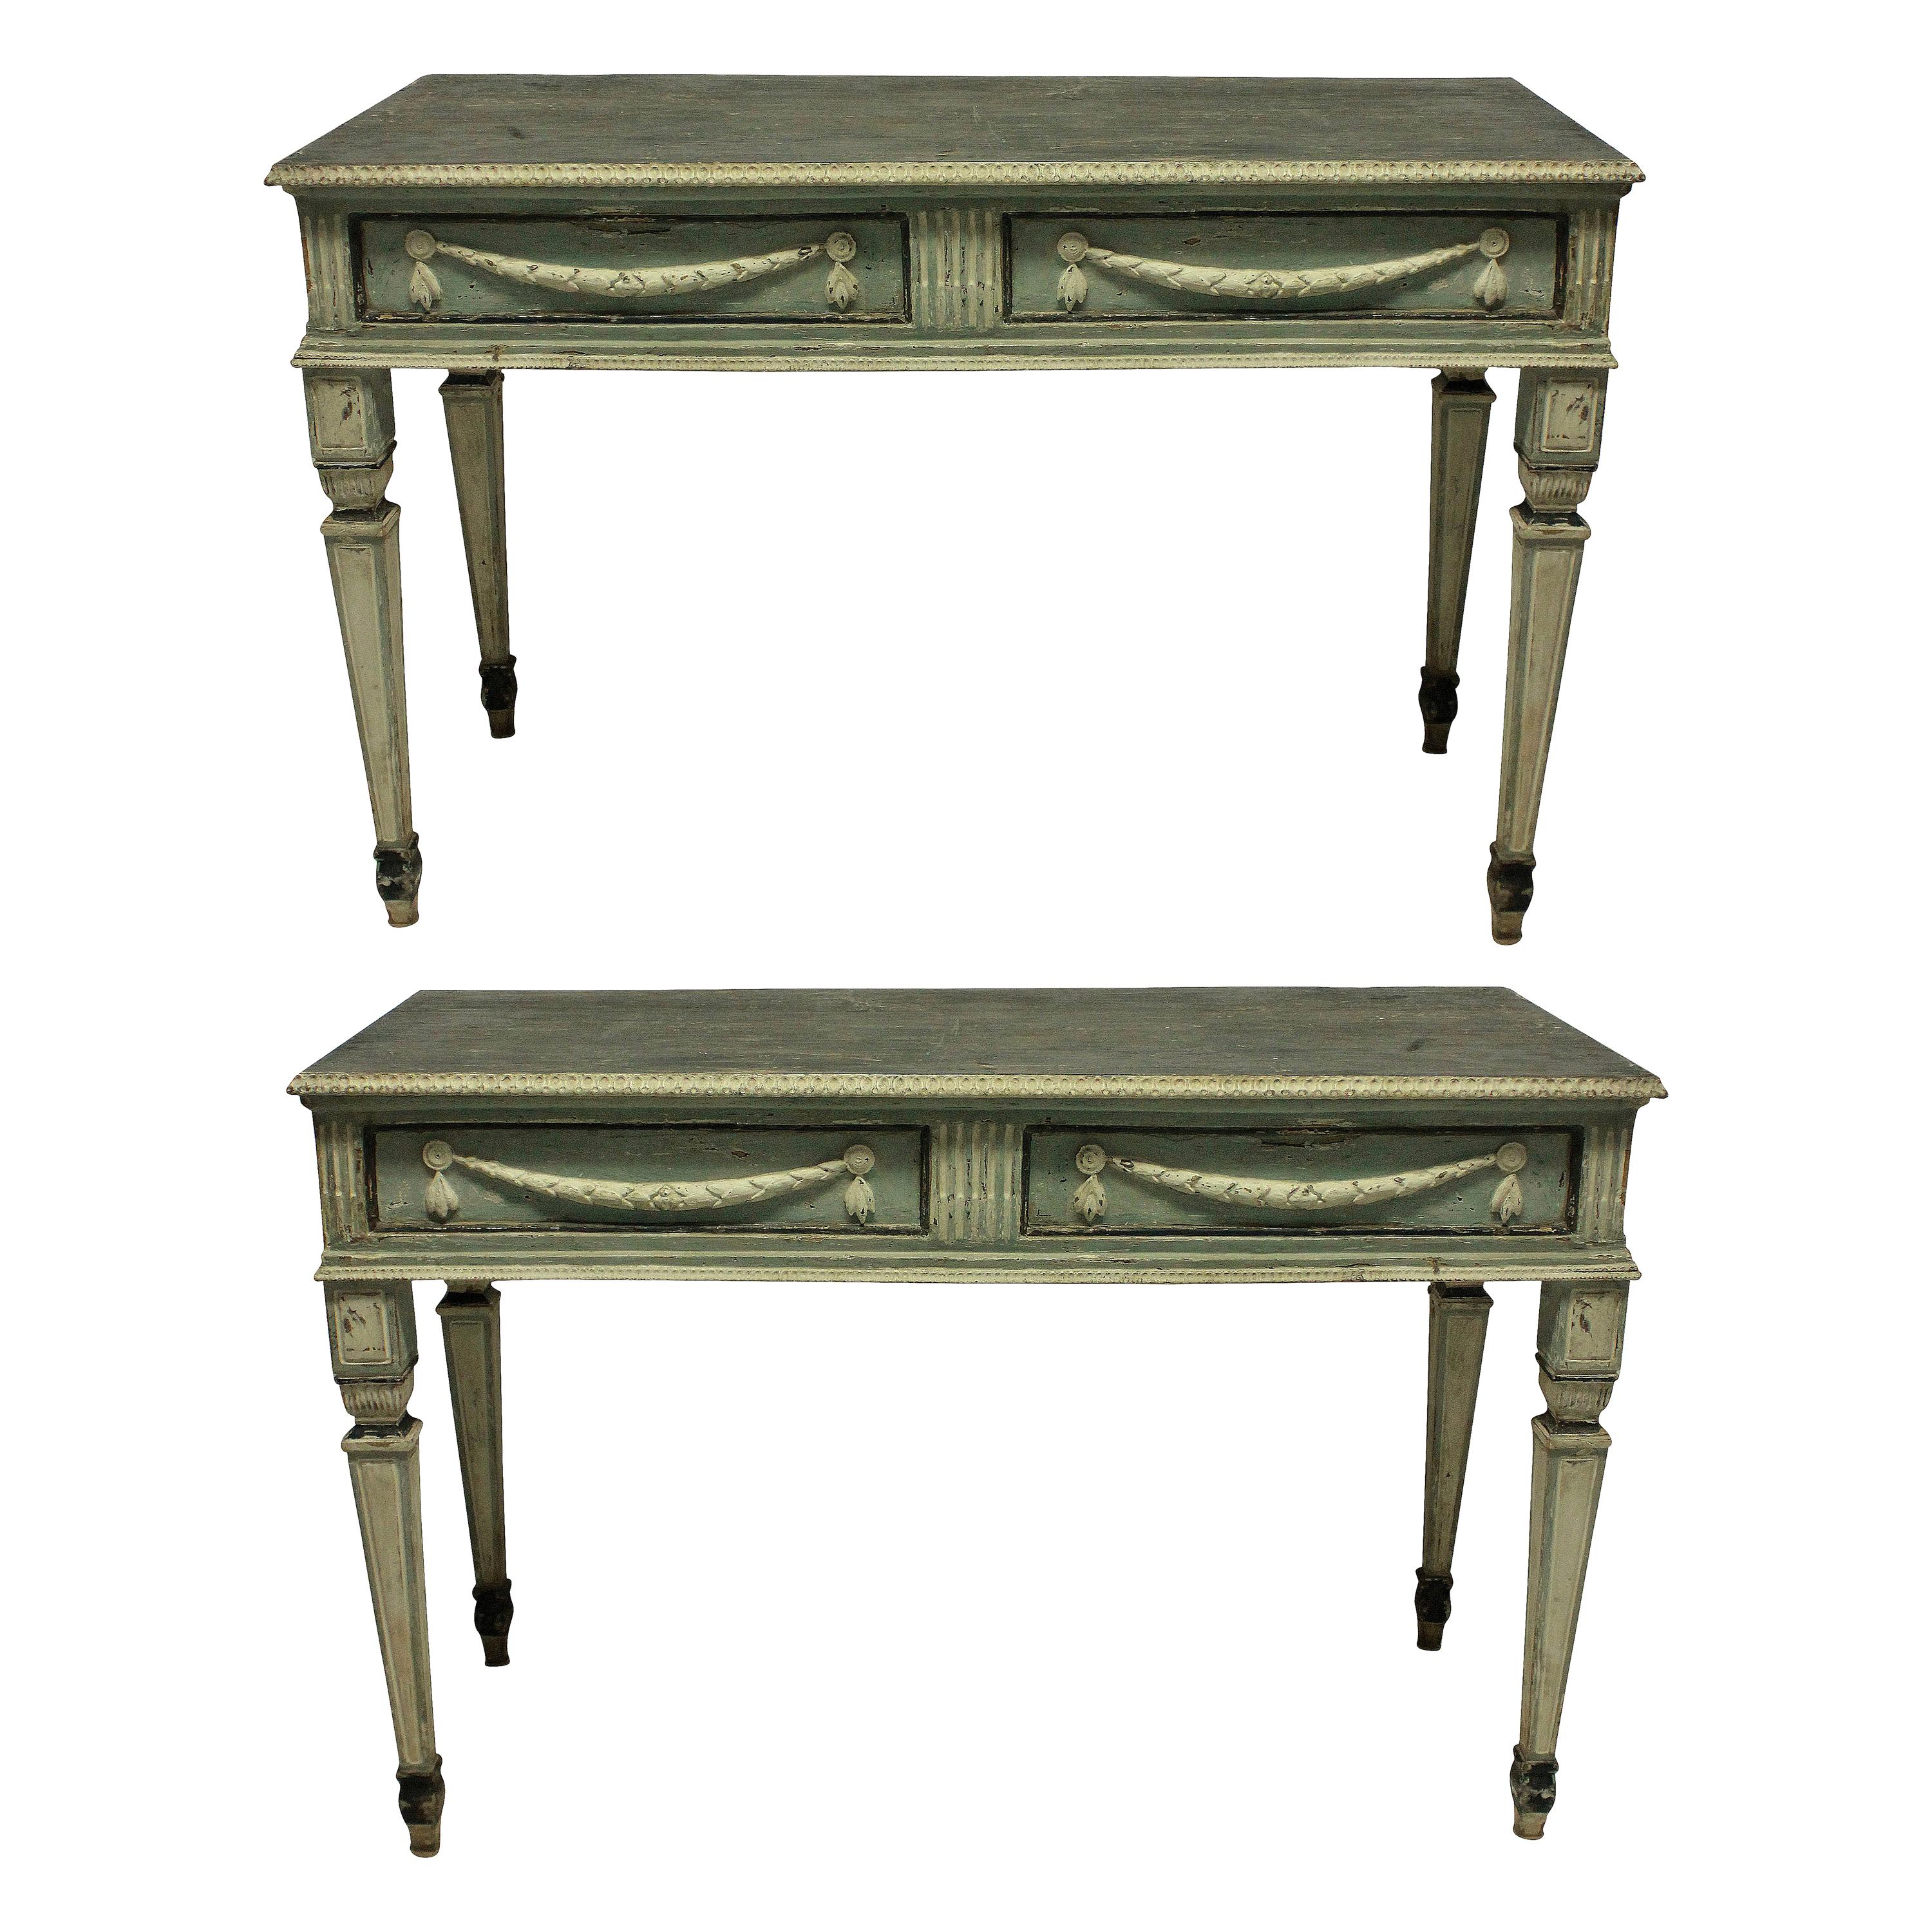 Pair of Large 18th Century Northern Italian Neoclassical Painted Console Tables